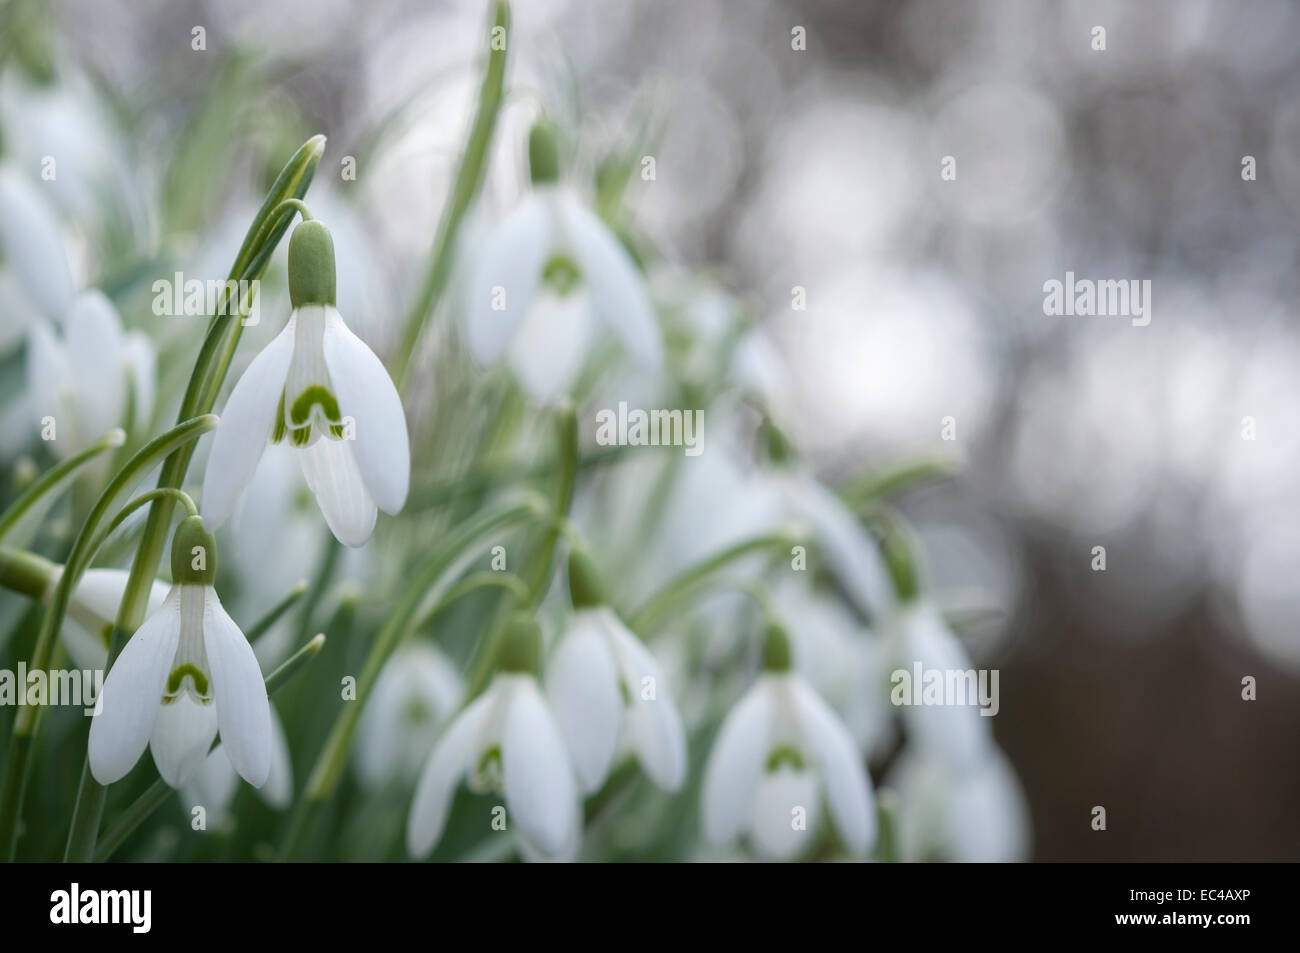 A clump of single Snowdrops with a light background. Taken from a low angle in a garden setting. Stock Photo